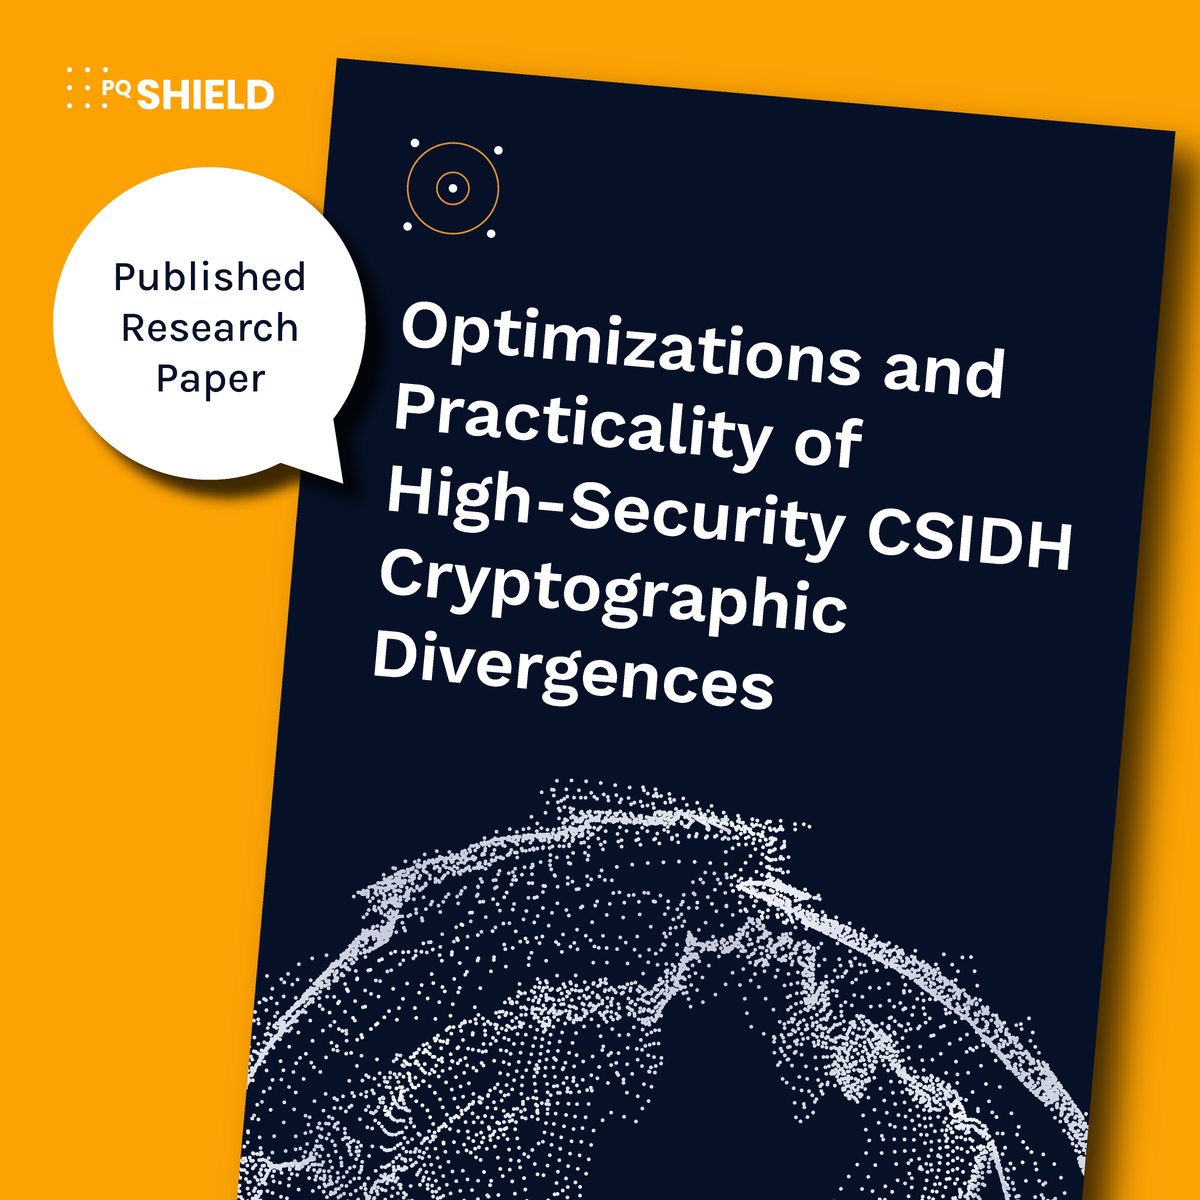 **PAPERS FROM THE PQSHIELD ARCHIVES - Optimizations and Practicality of High-Security CSIDH Cryptographic Divergences This paper appeared in the first issue of the new IACR journal Communications in Cryptology! hubs.li/Q02vjhGk0 #postquantum #cryptography #pqc #crypto